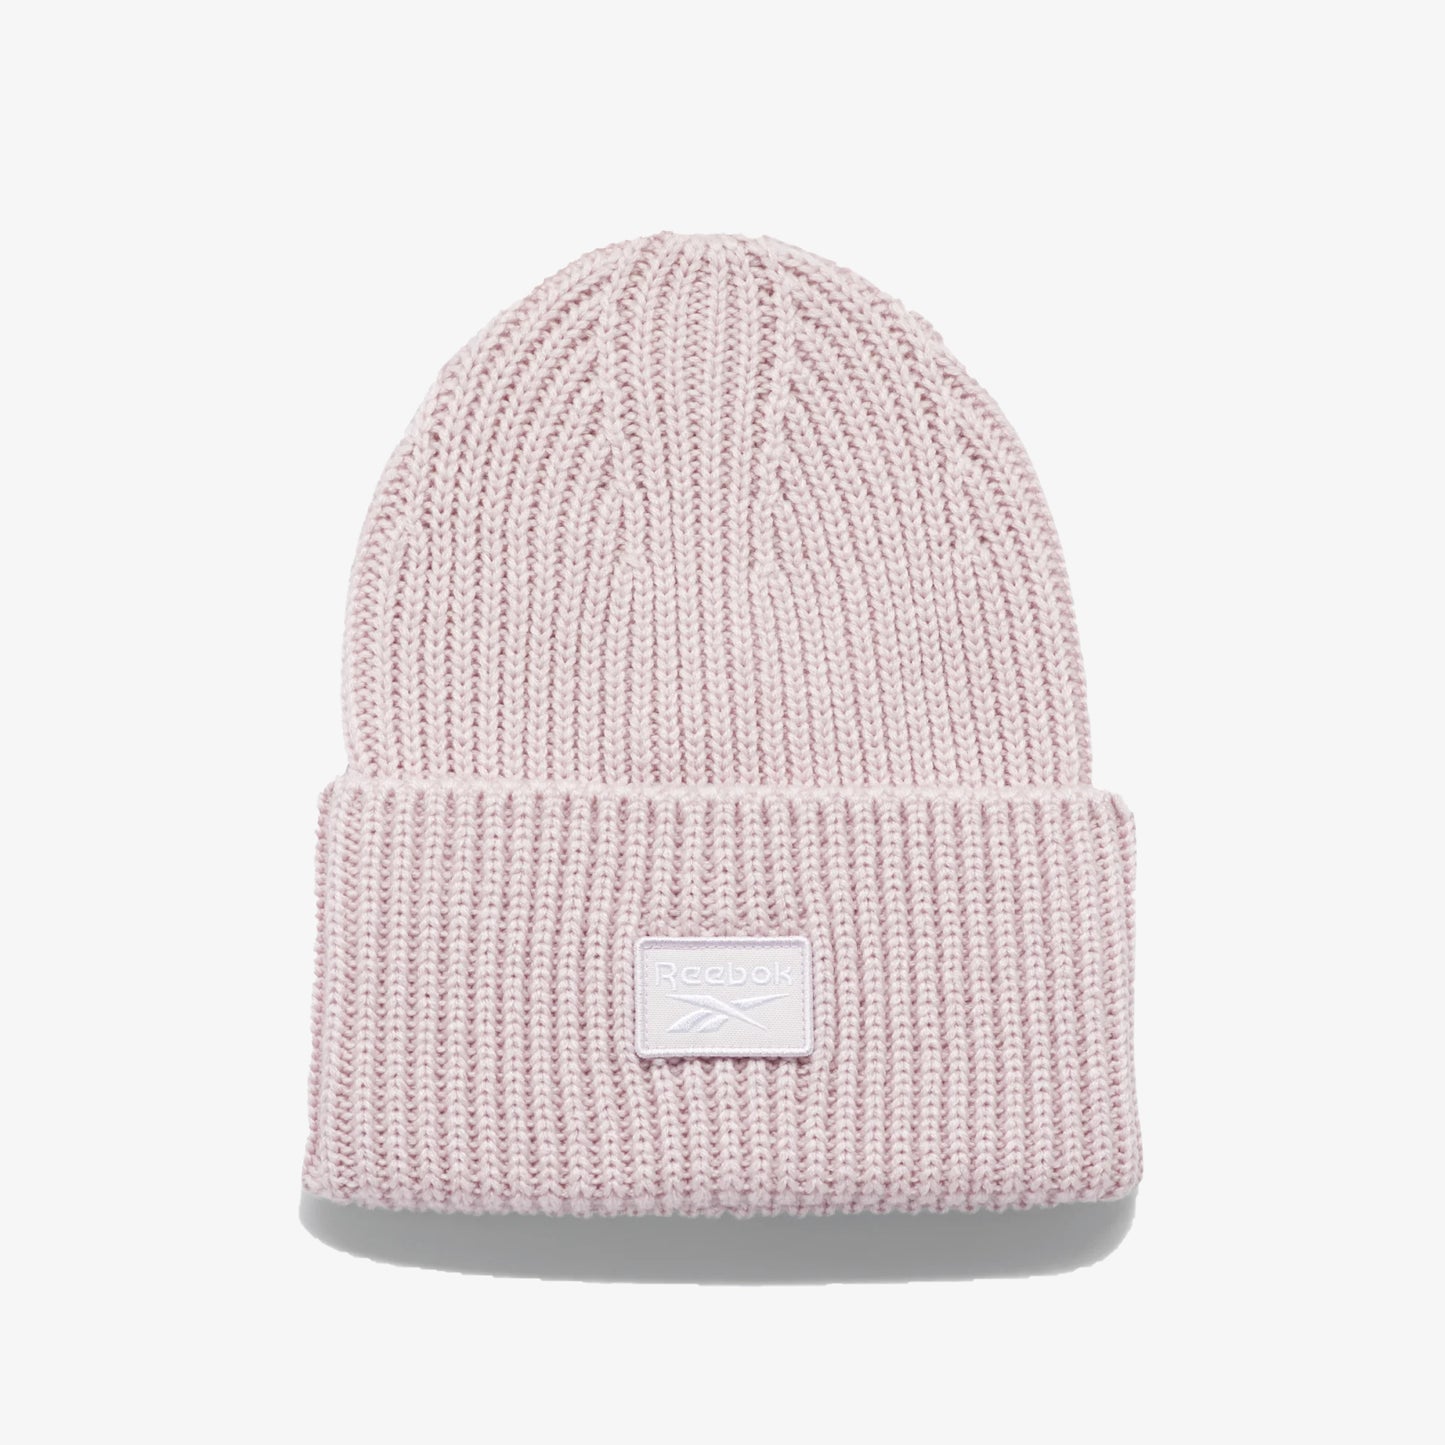 CLASSICS FOUNDATION BEANIE 'FROST/BERRY'